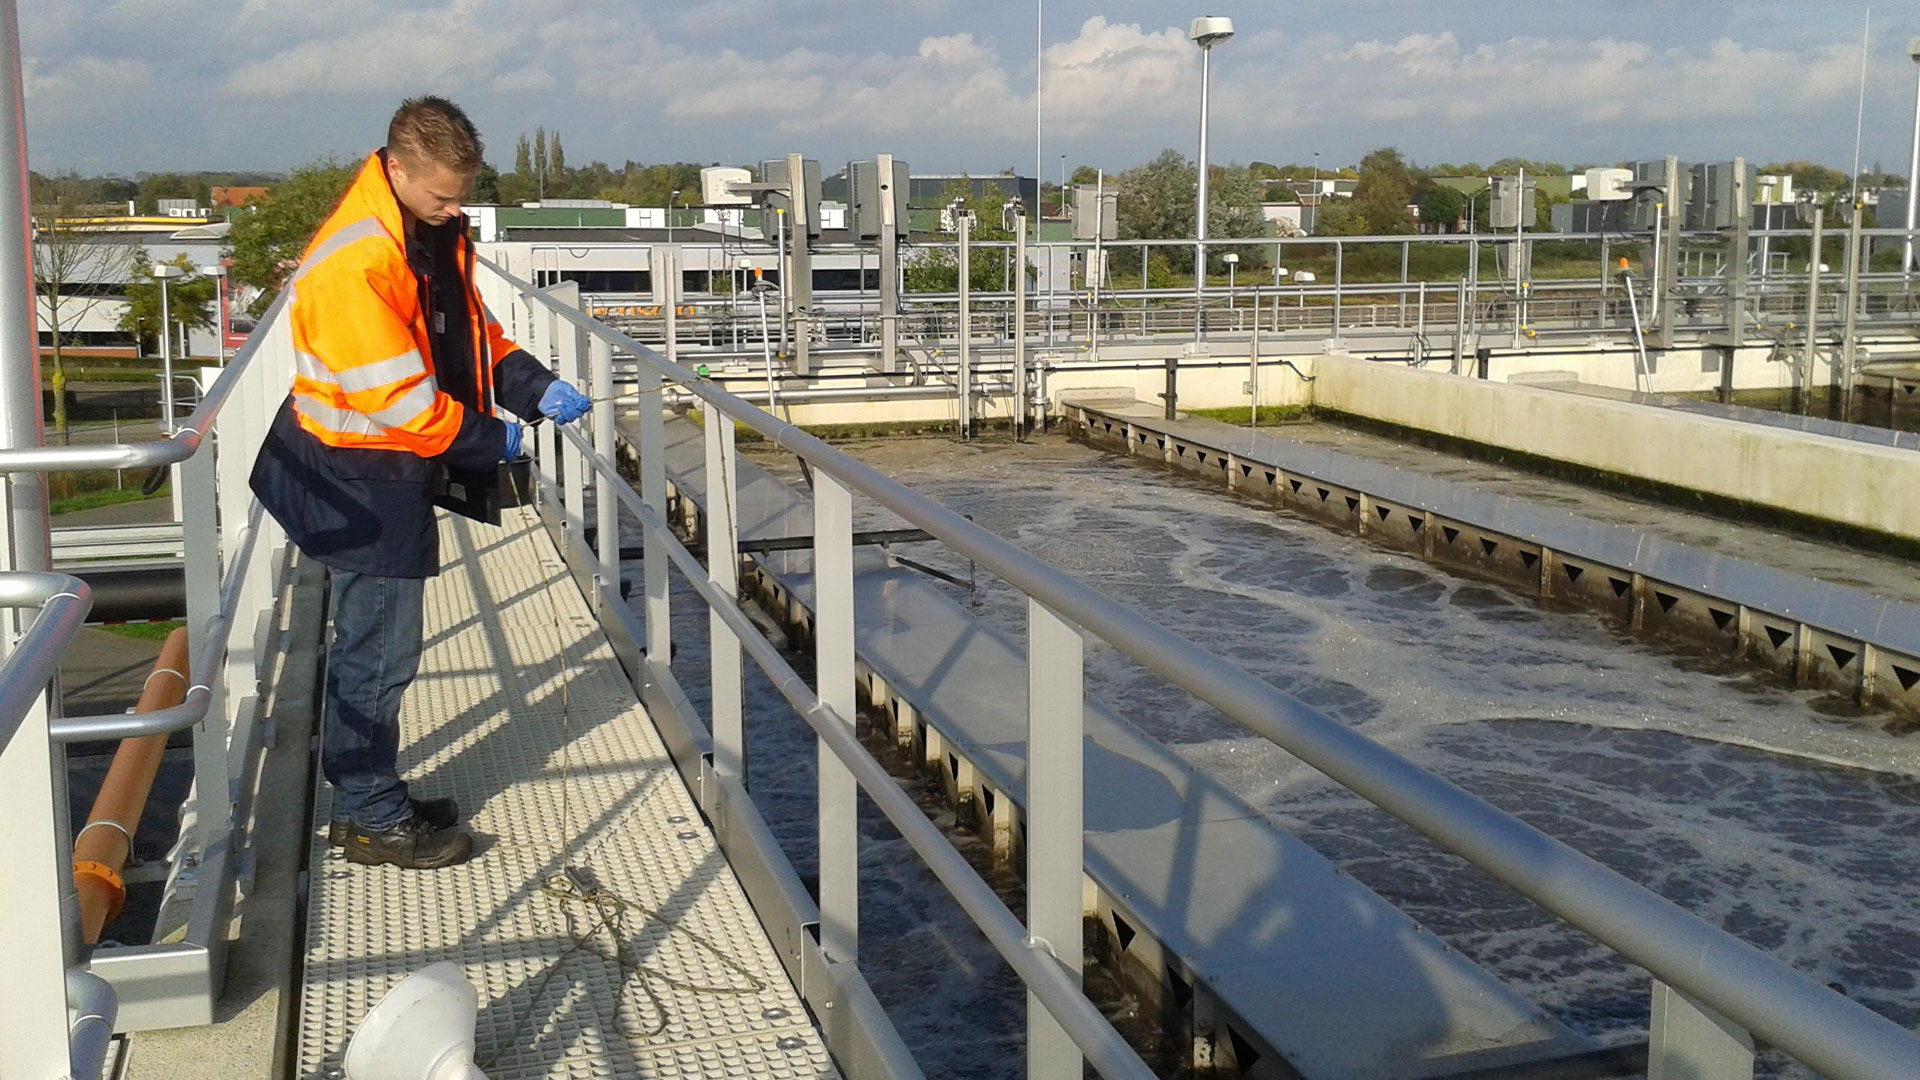 Specialist at wastewater plant